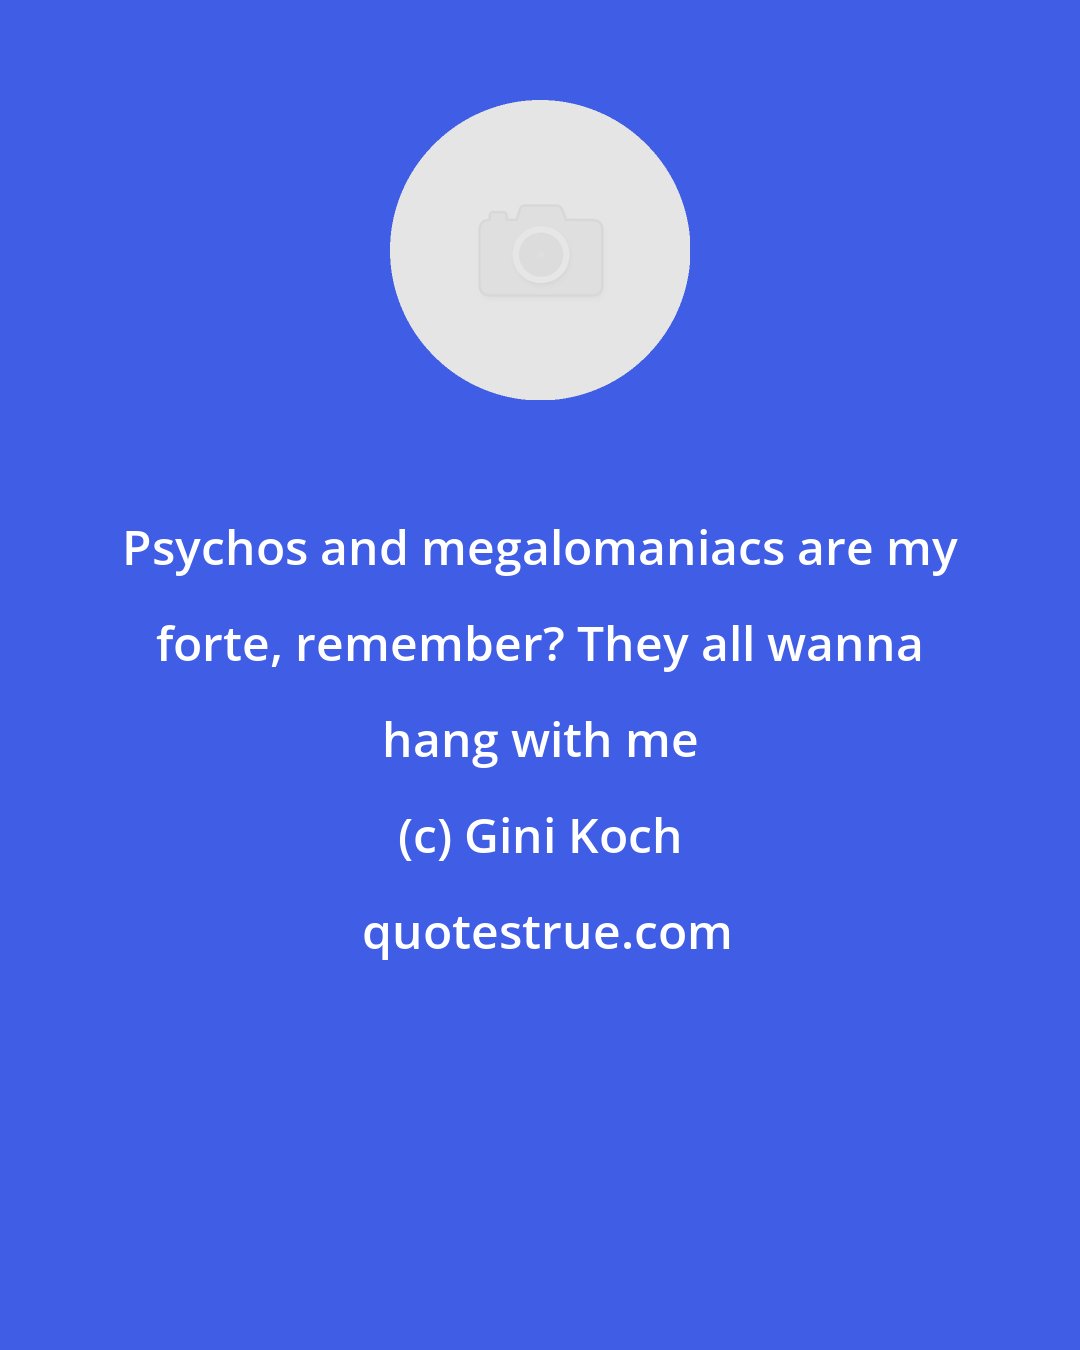 Gini Koch: Psychos and megalomaniacs are my forte, remember? They all wanna hang with me